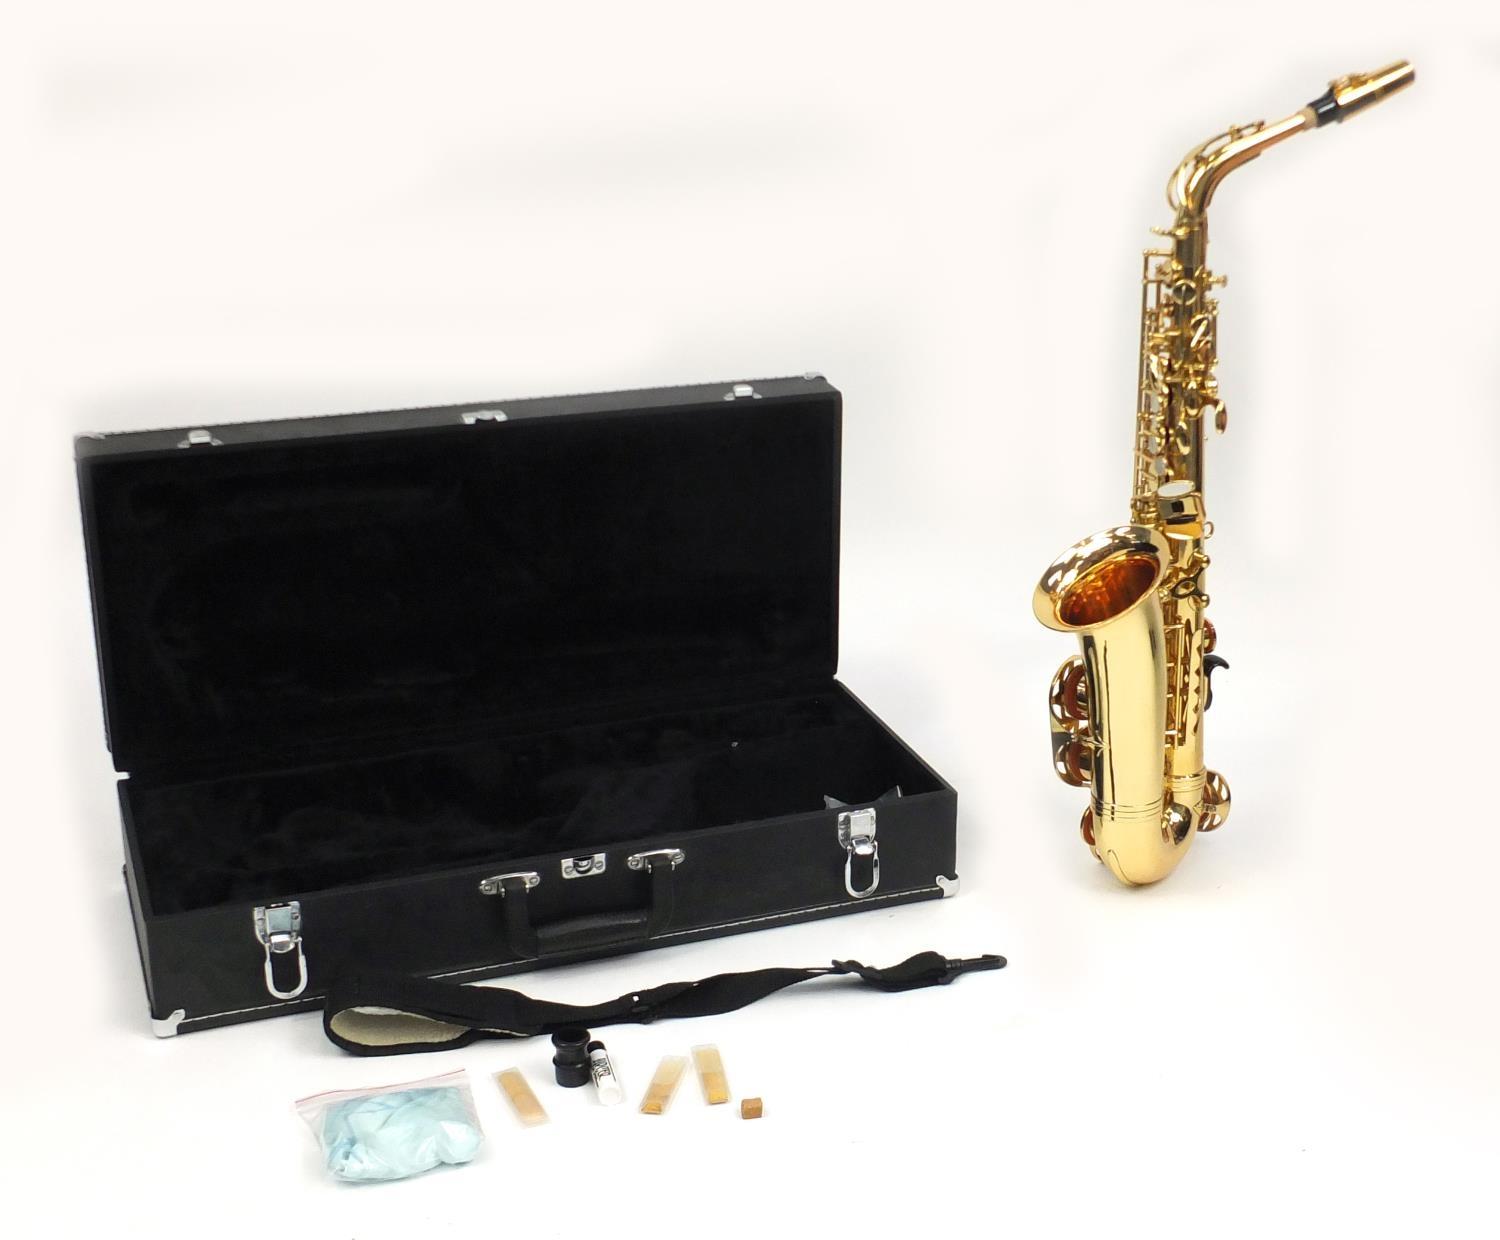 Jupiter 500 series brass saxophone, with Mother of Perl keys and fitted case, numbered 101116, - Image 2 of 10